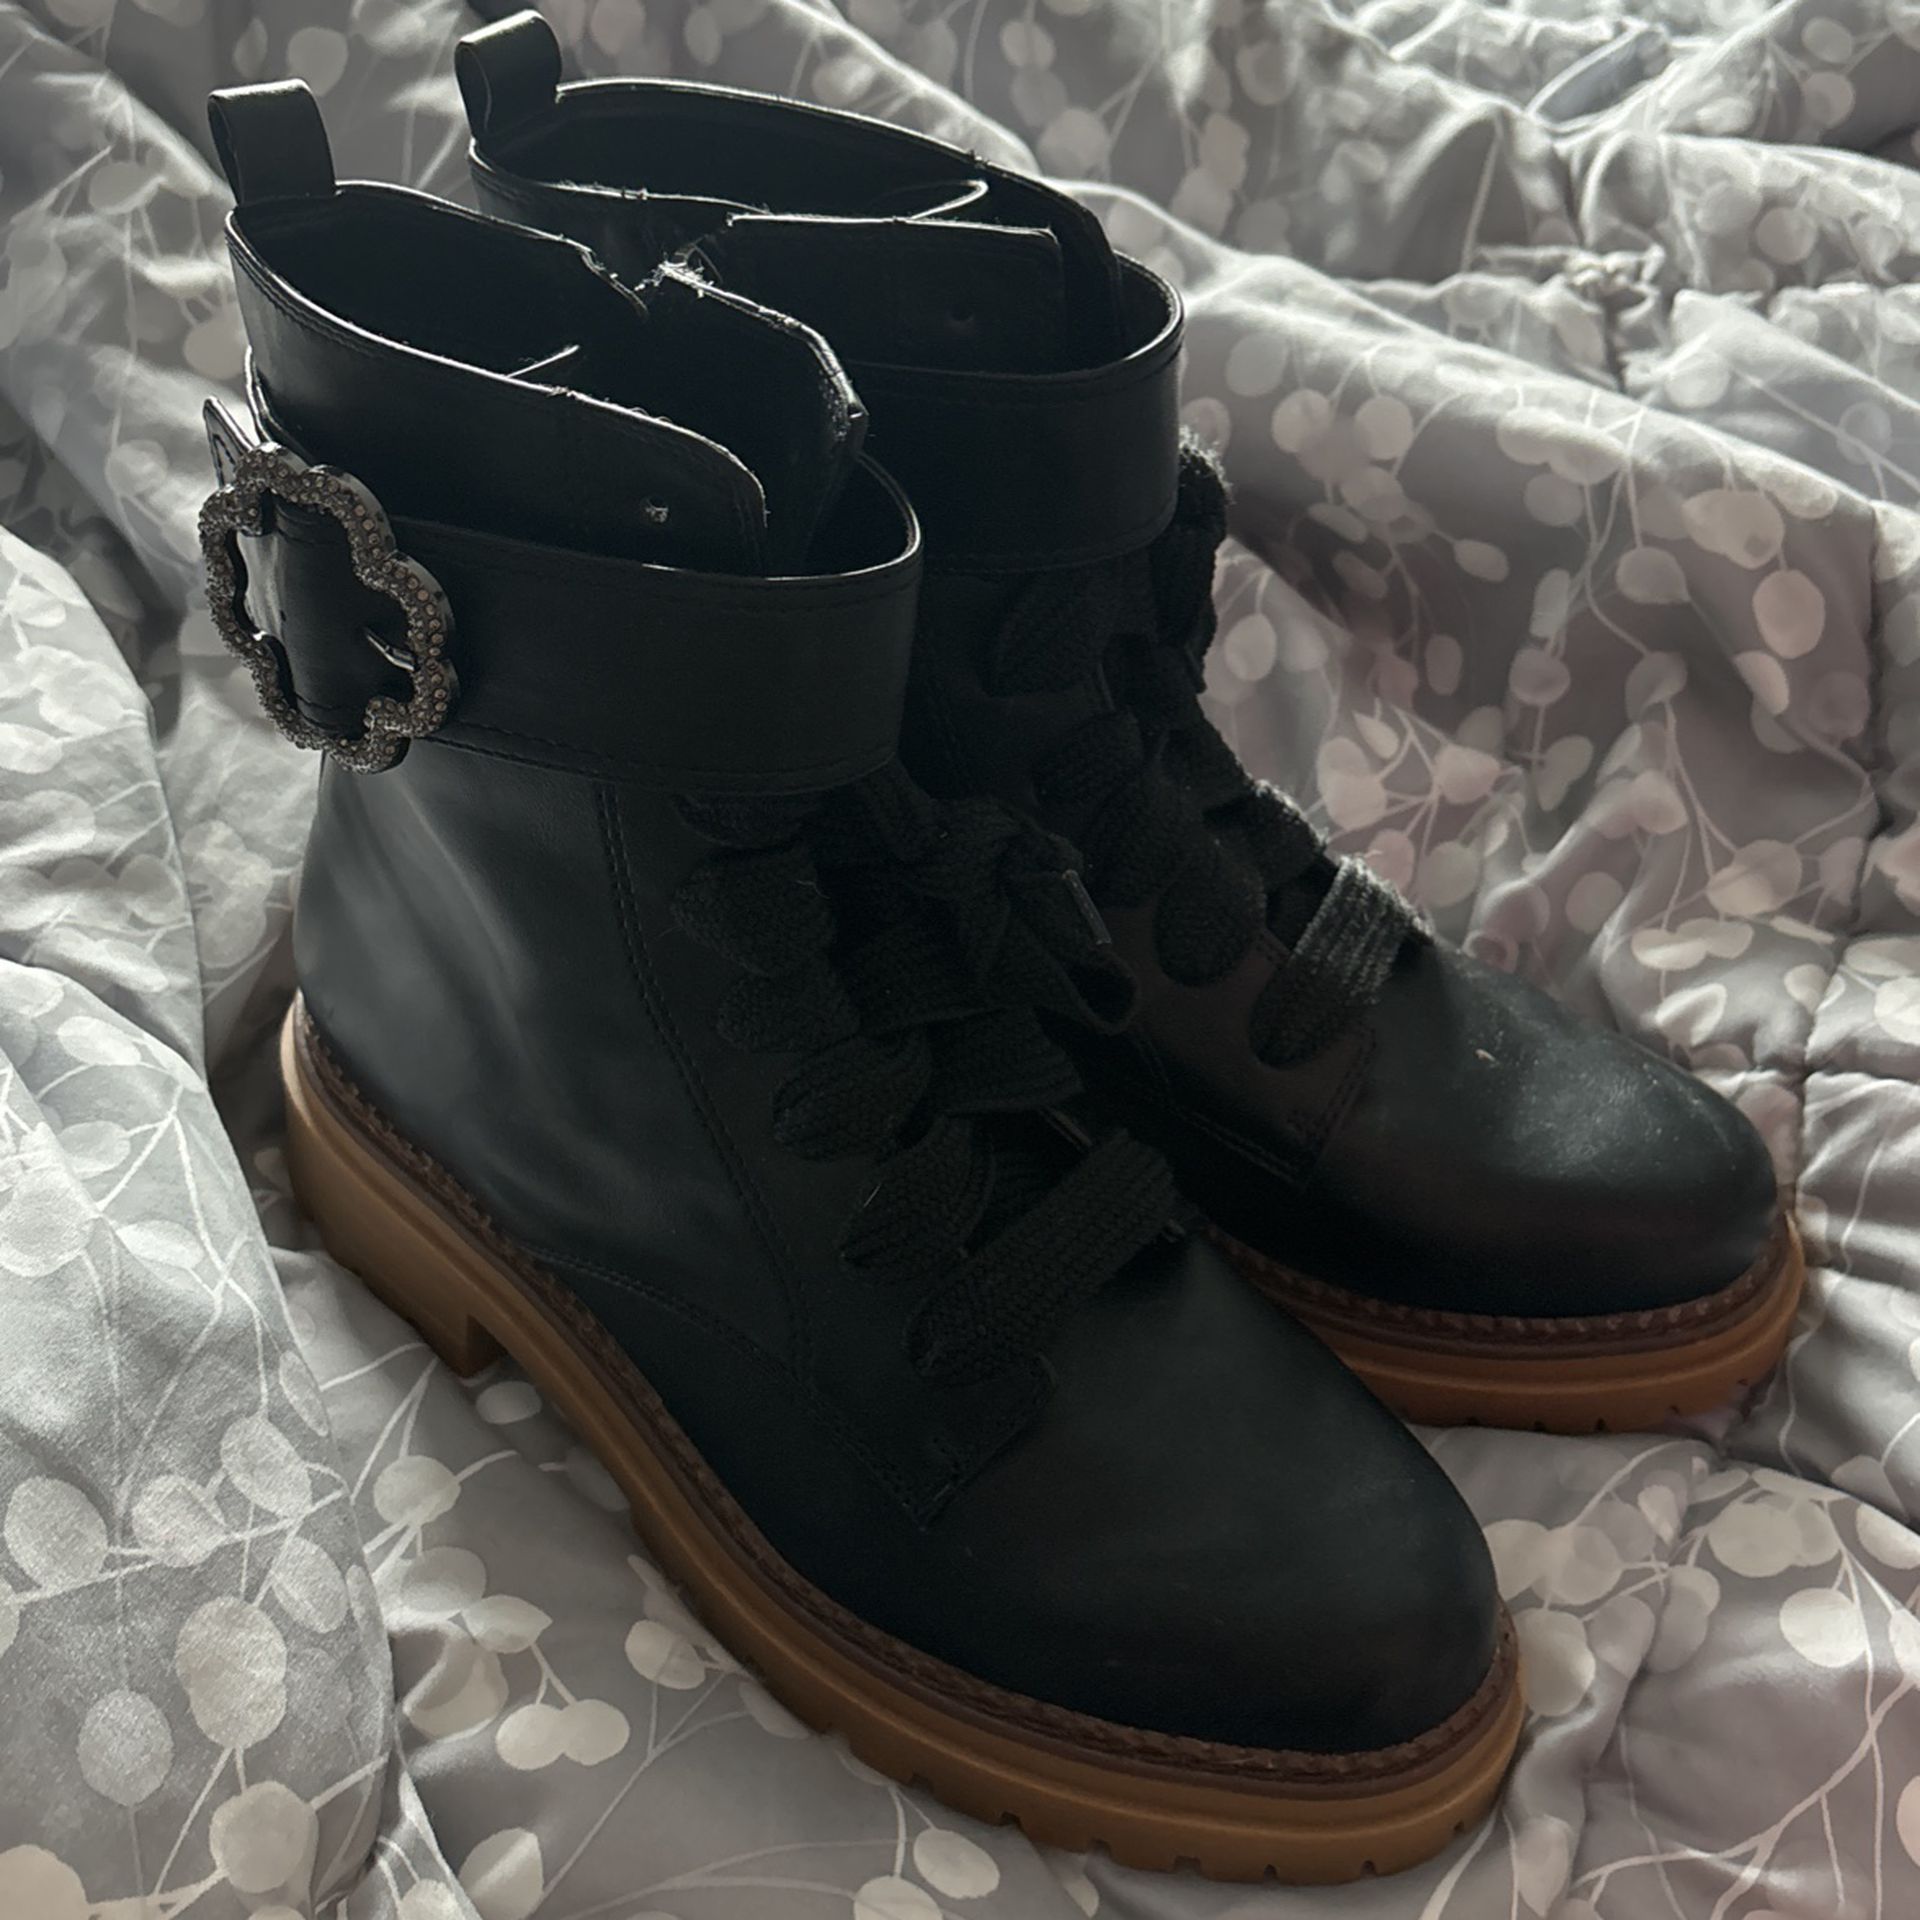 Black boots never worn size 10